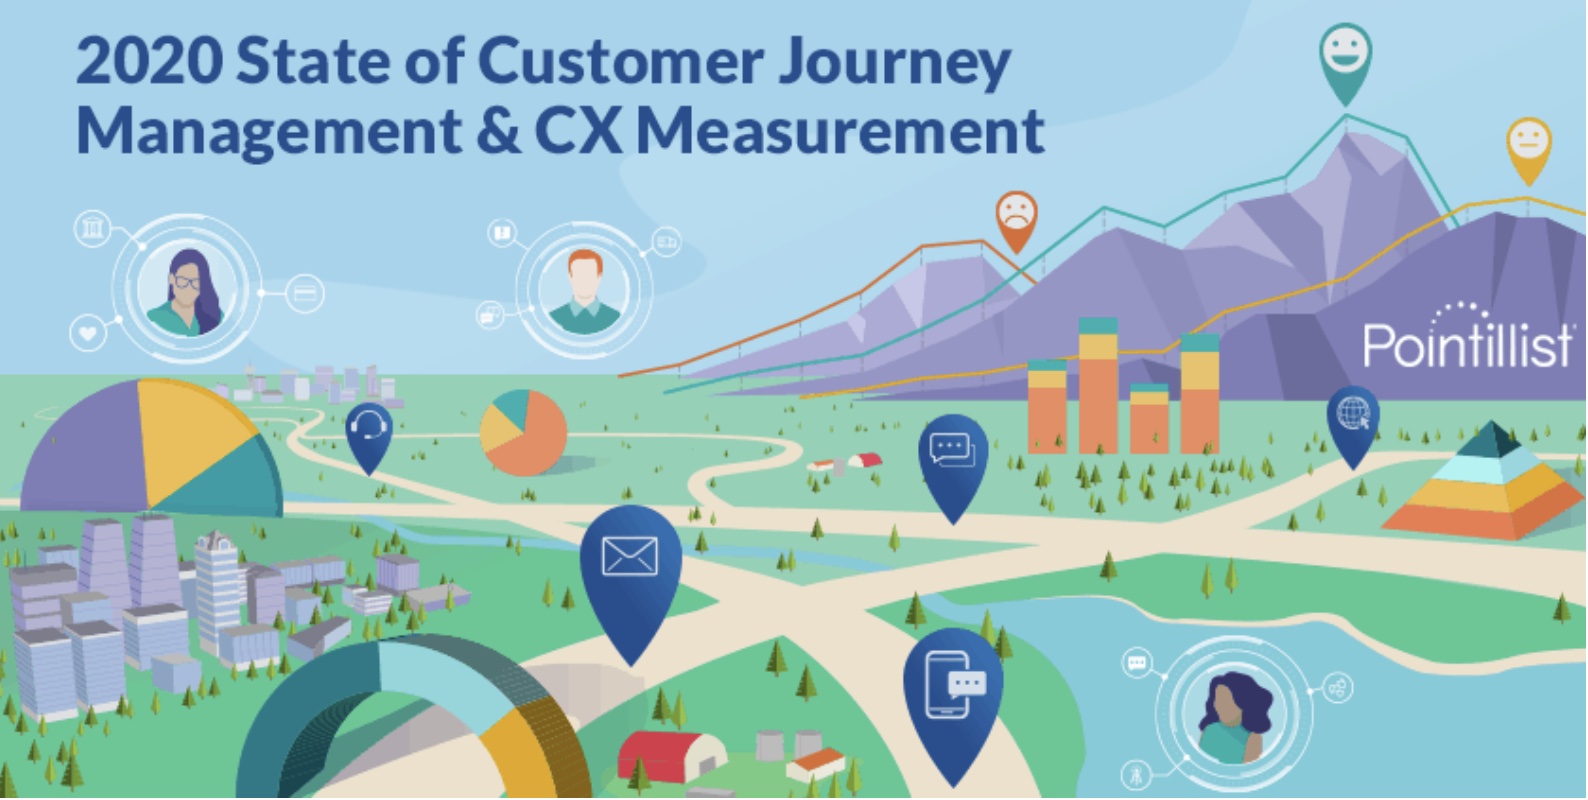 Companies still struggle with measuring consumer experience ROI